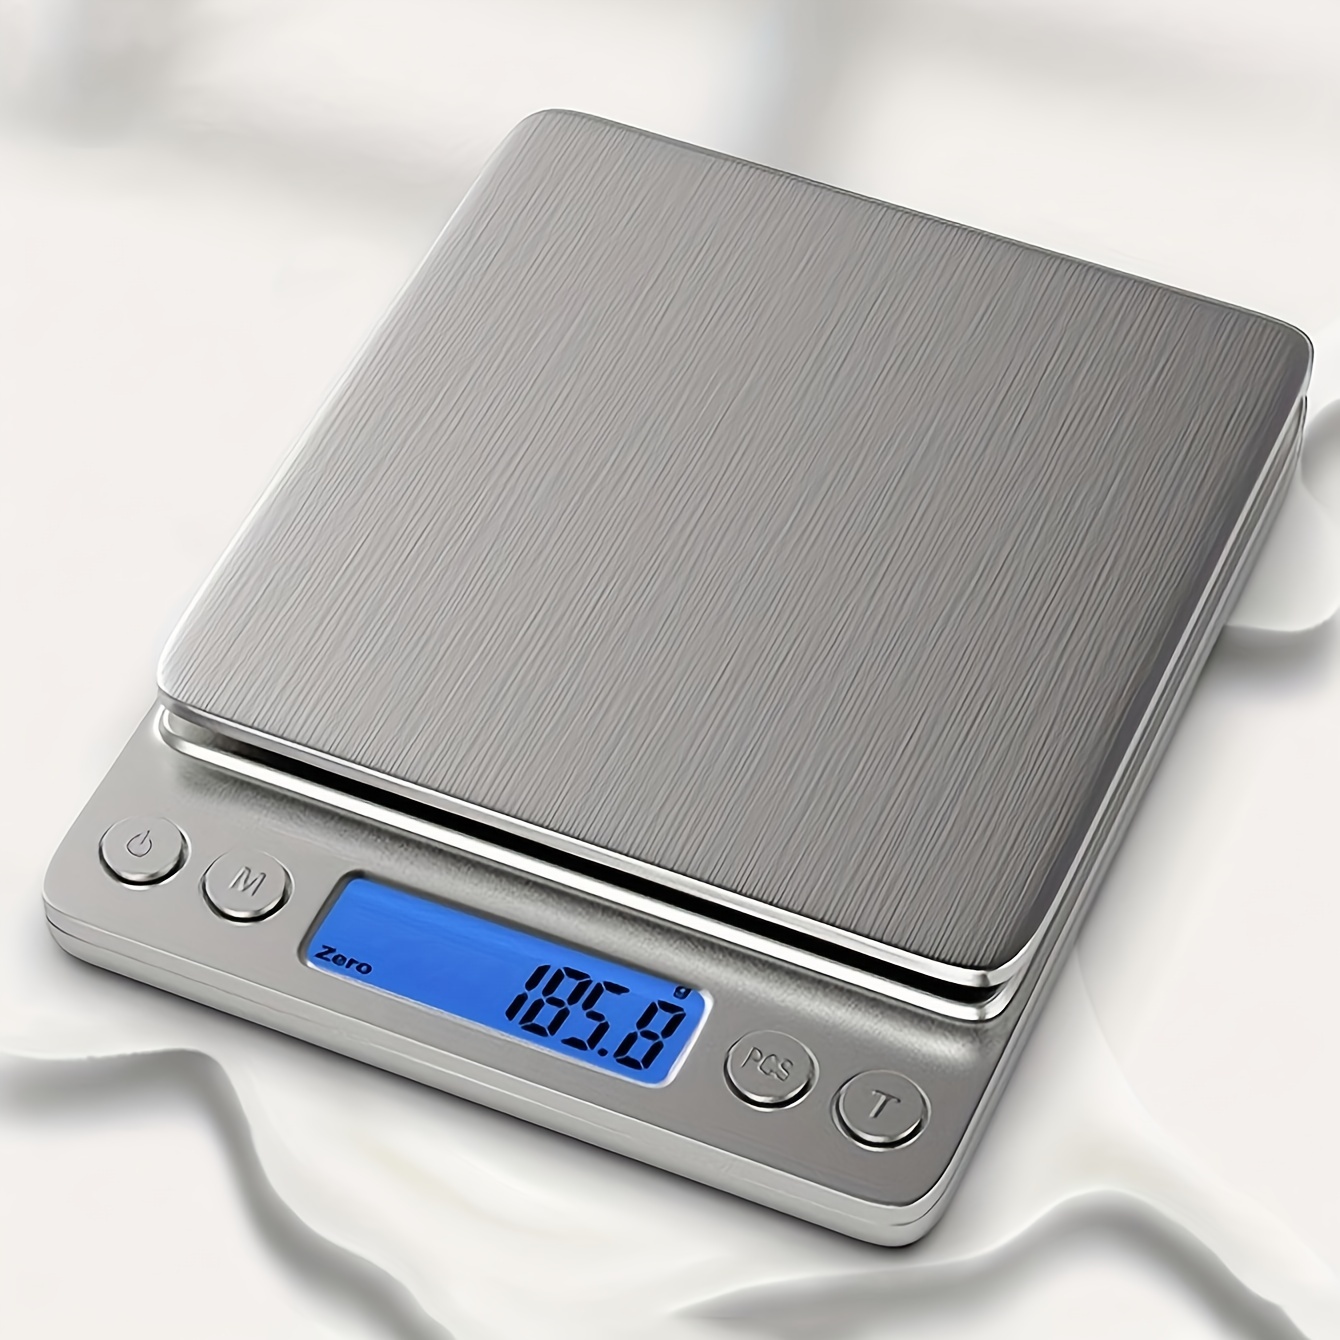 Kitchen Scales, Weights & Measures